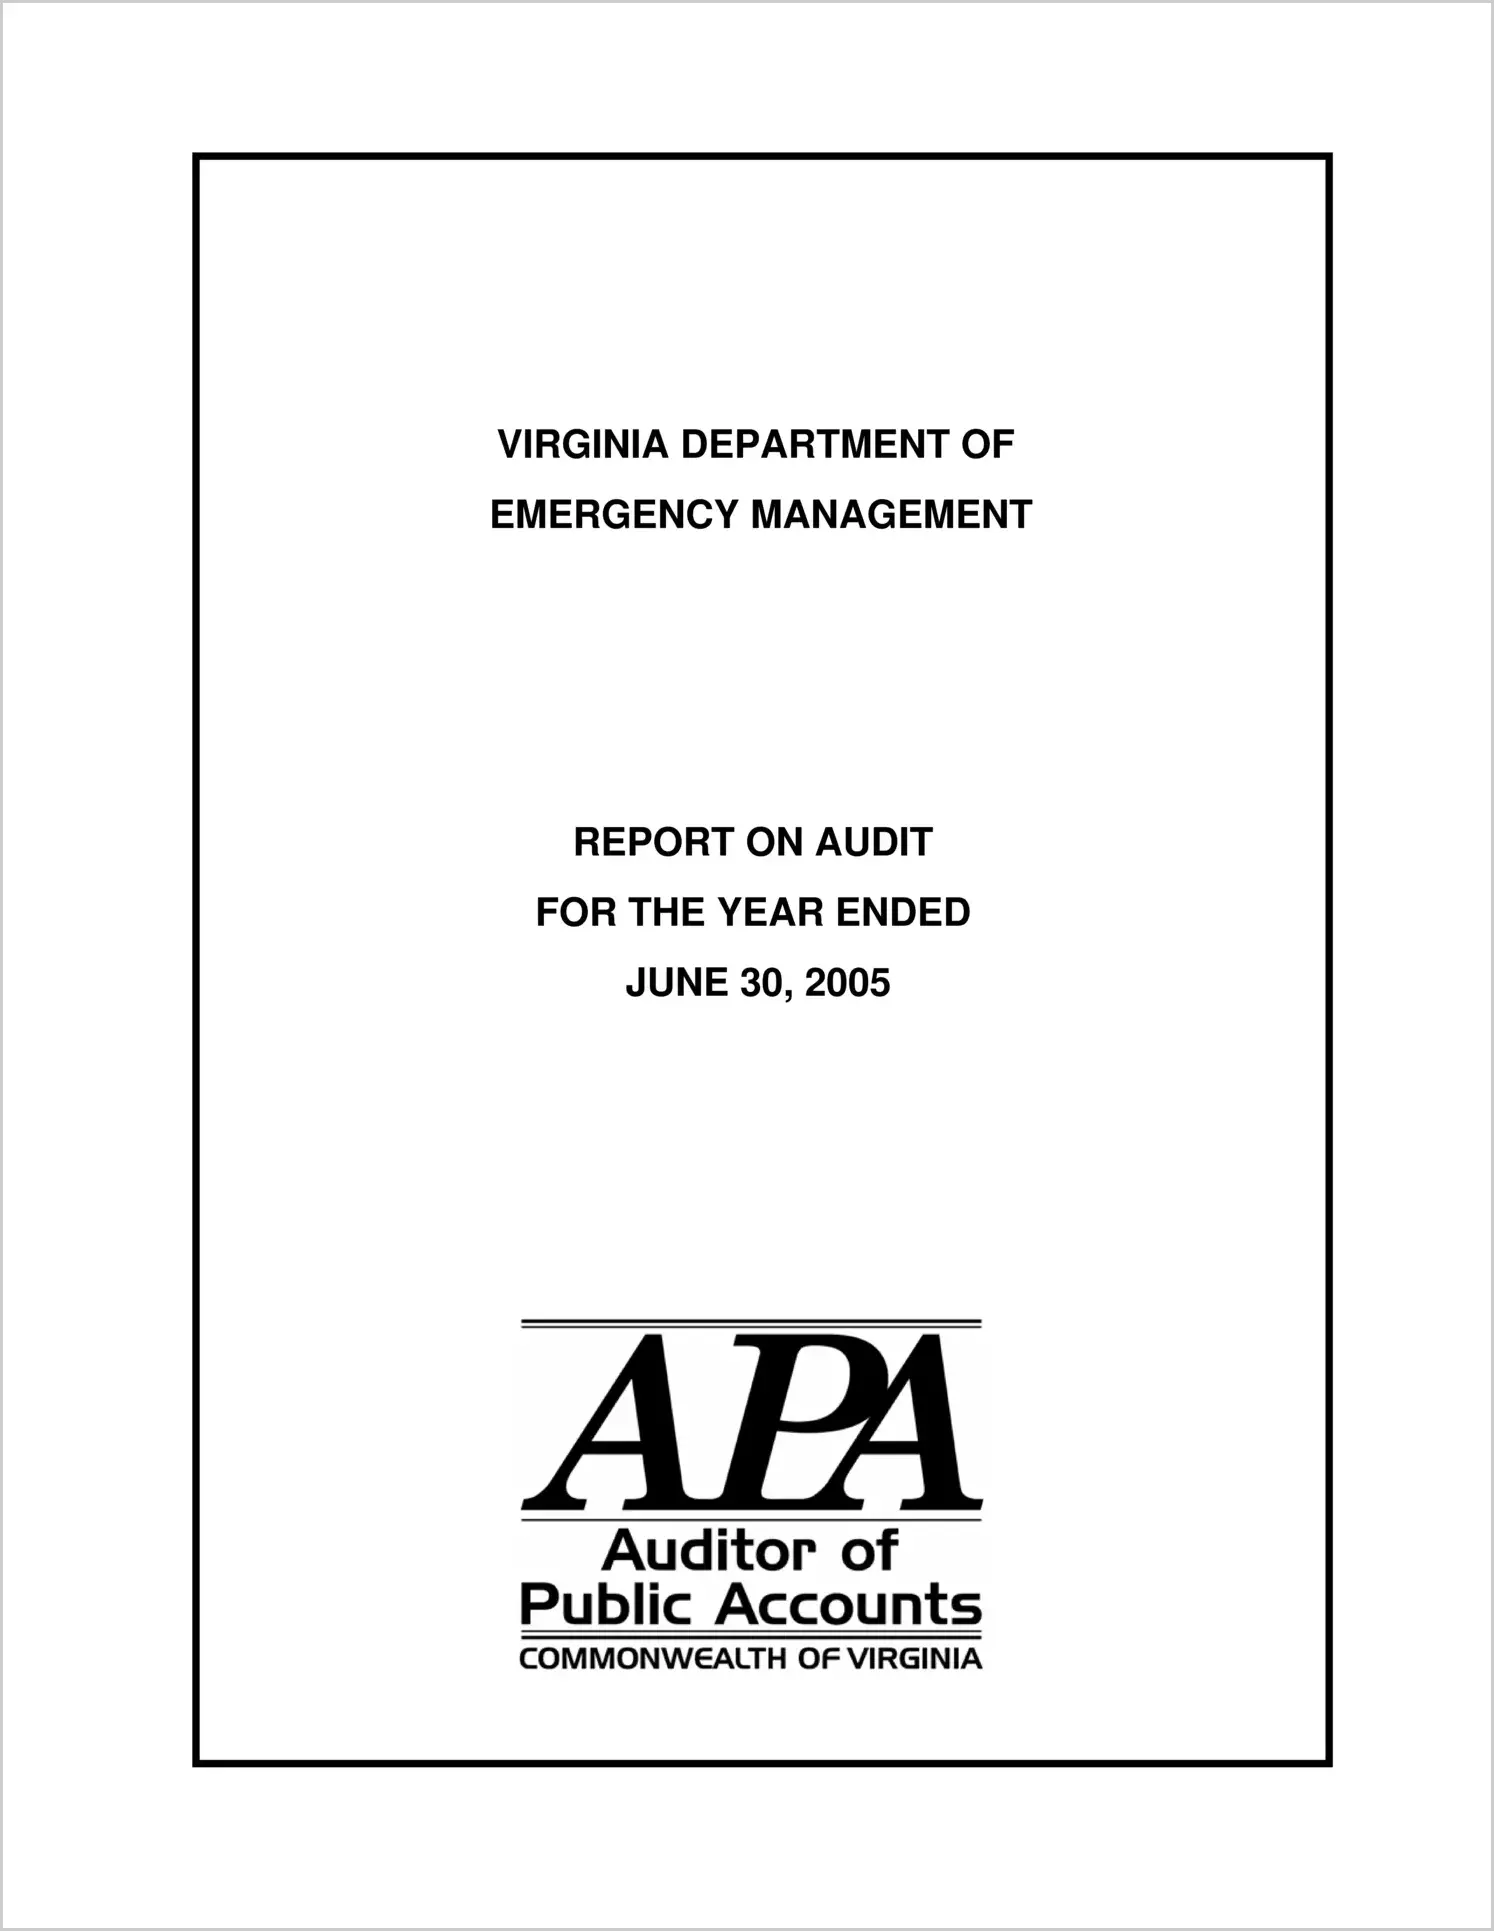 Department of Emergency Management for the year ended June 30, 2005